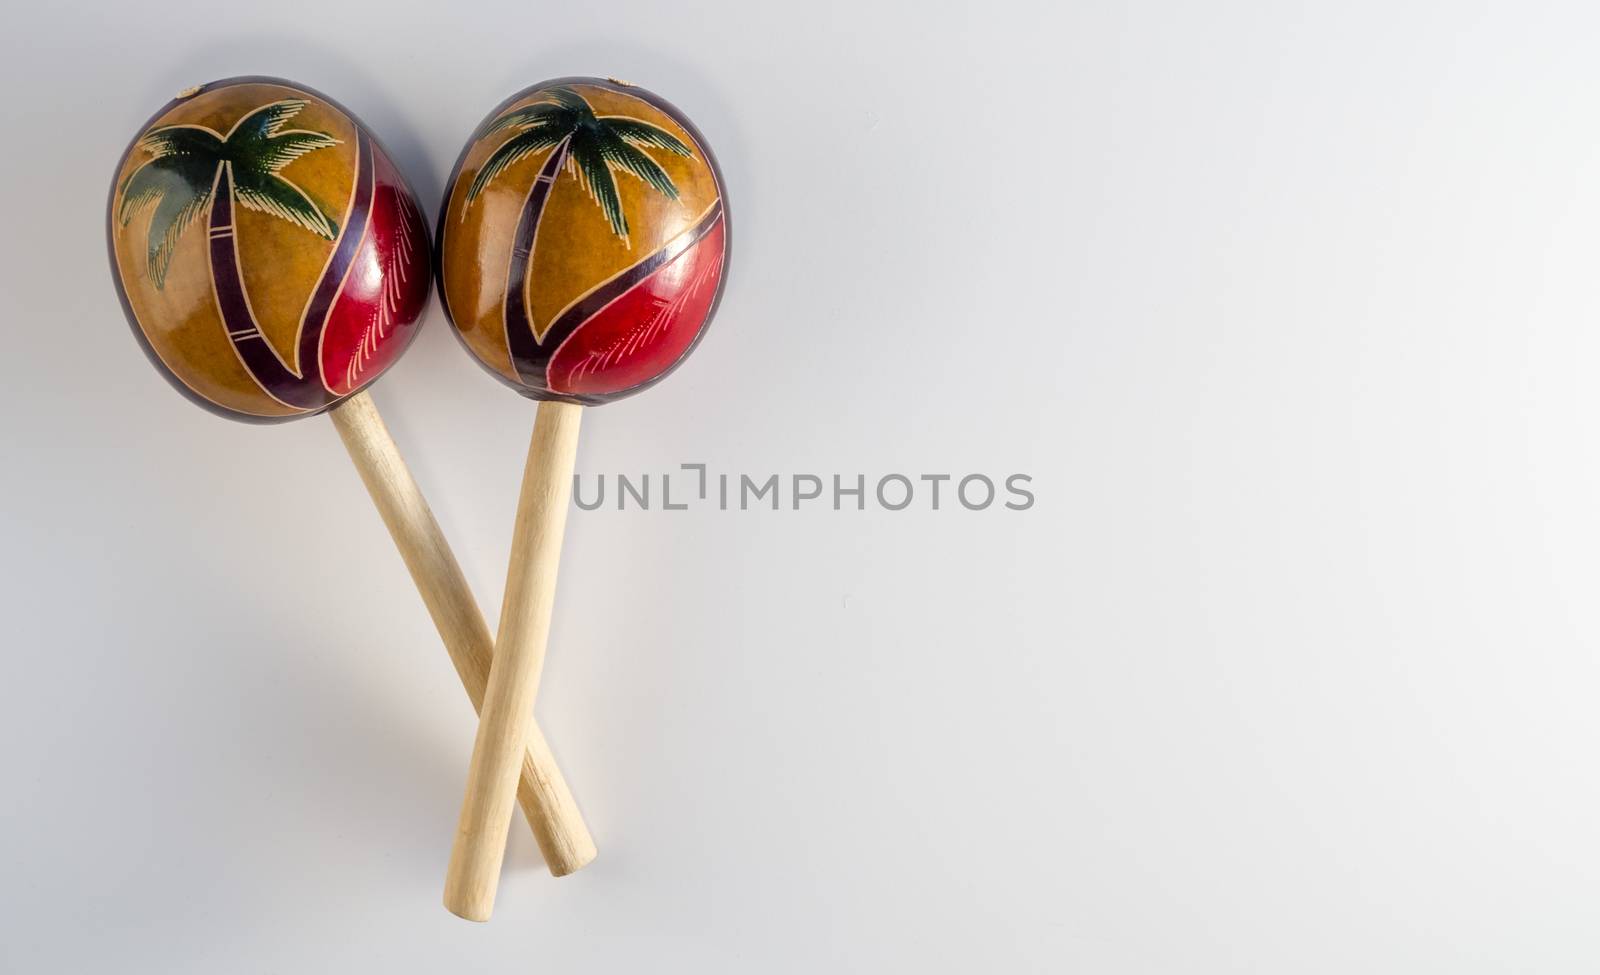 Pair of Maracas by krisblackphotography